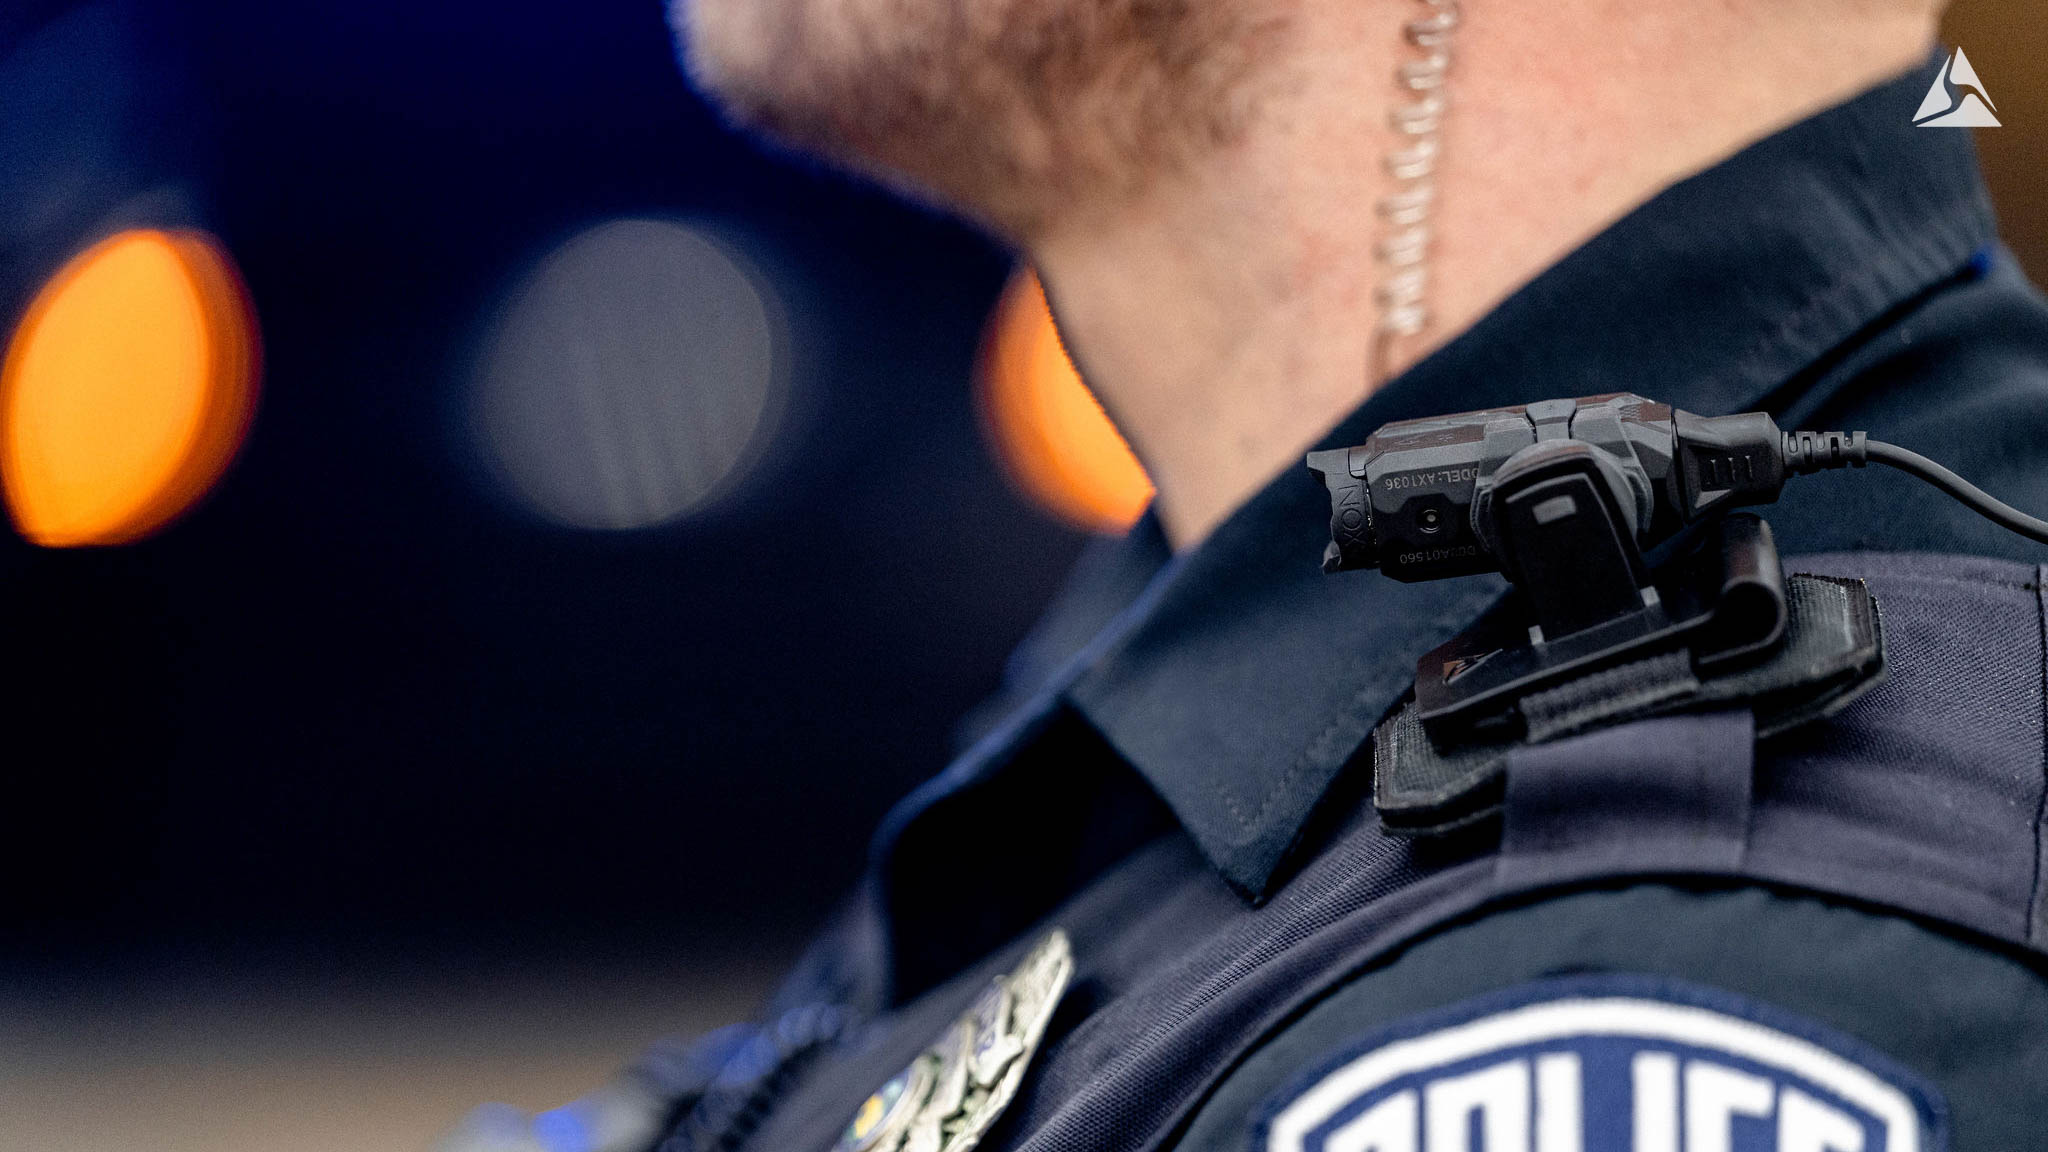 Axon launches next generation body camera with more features to